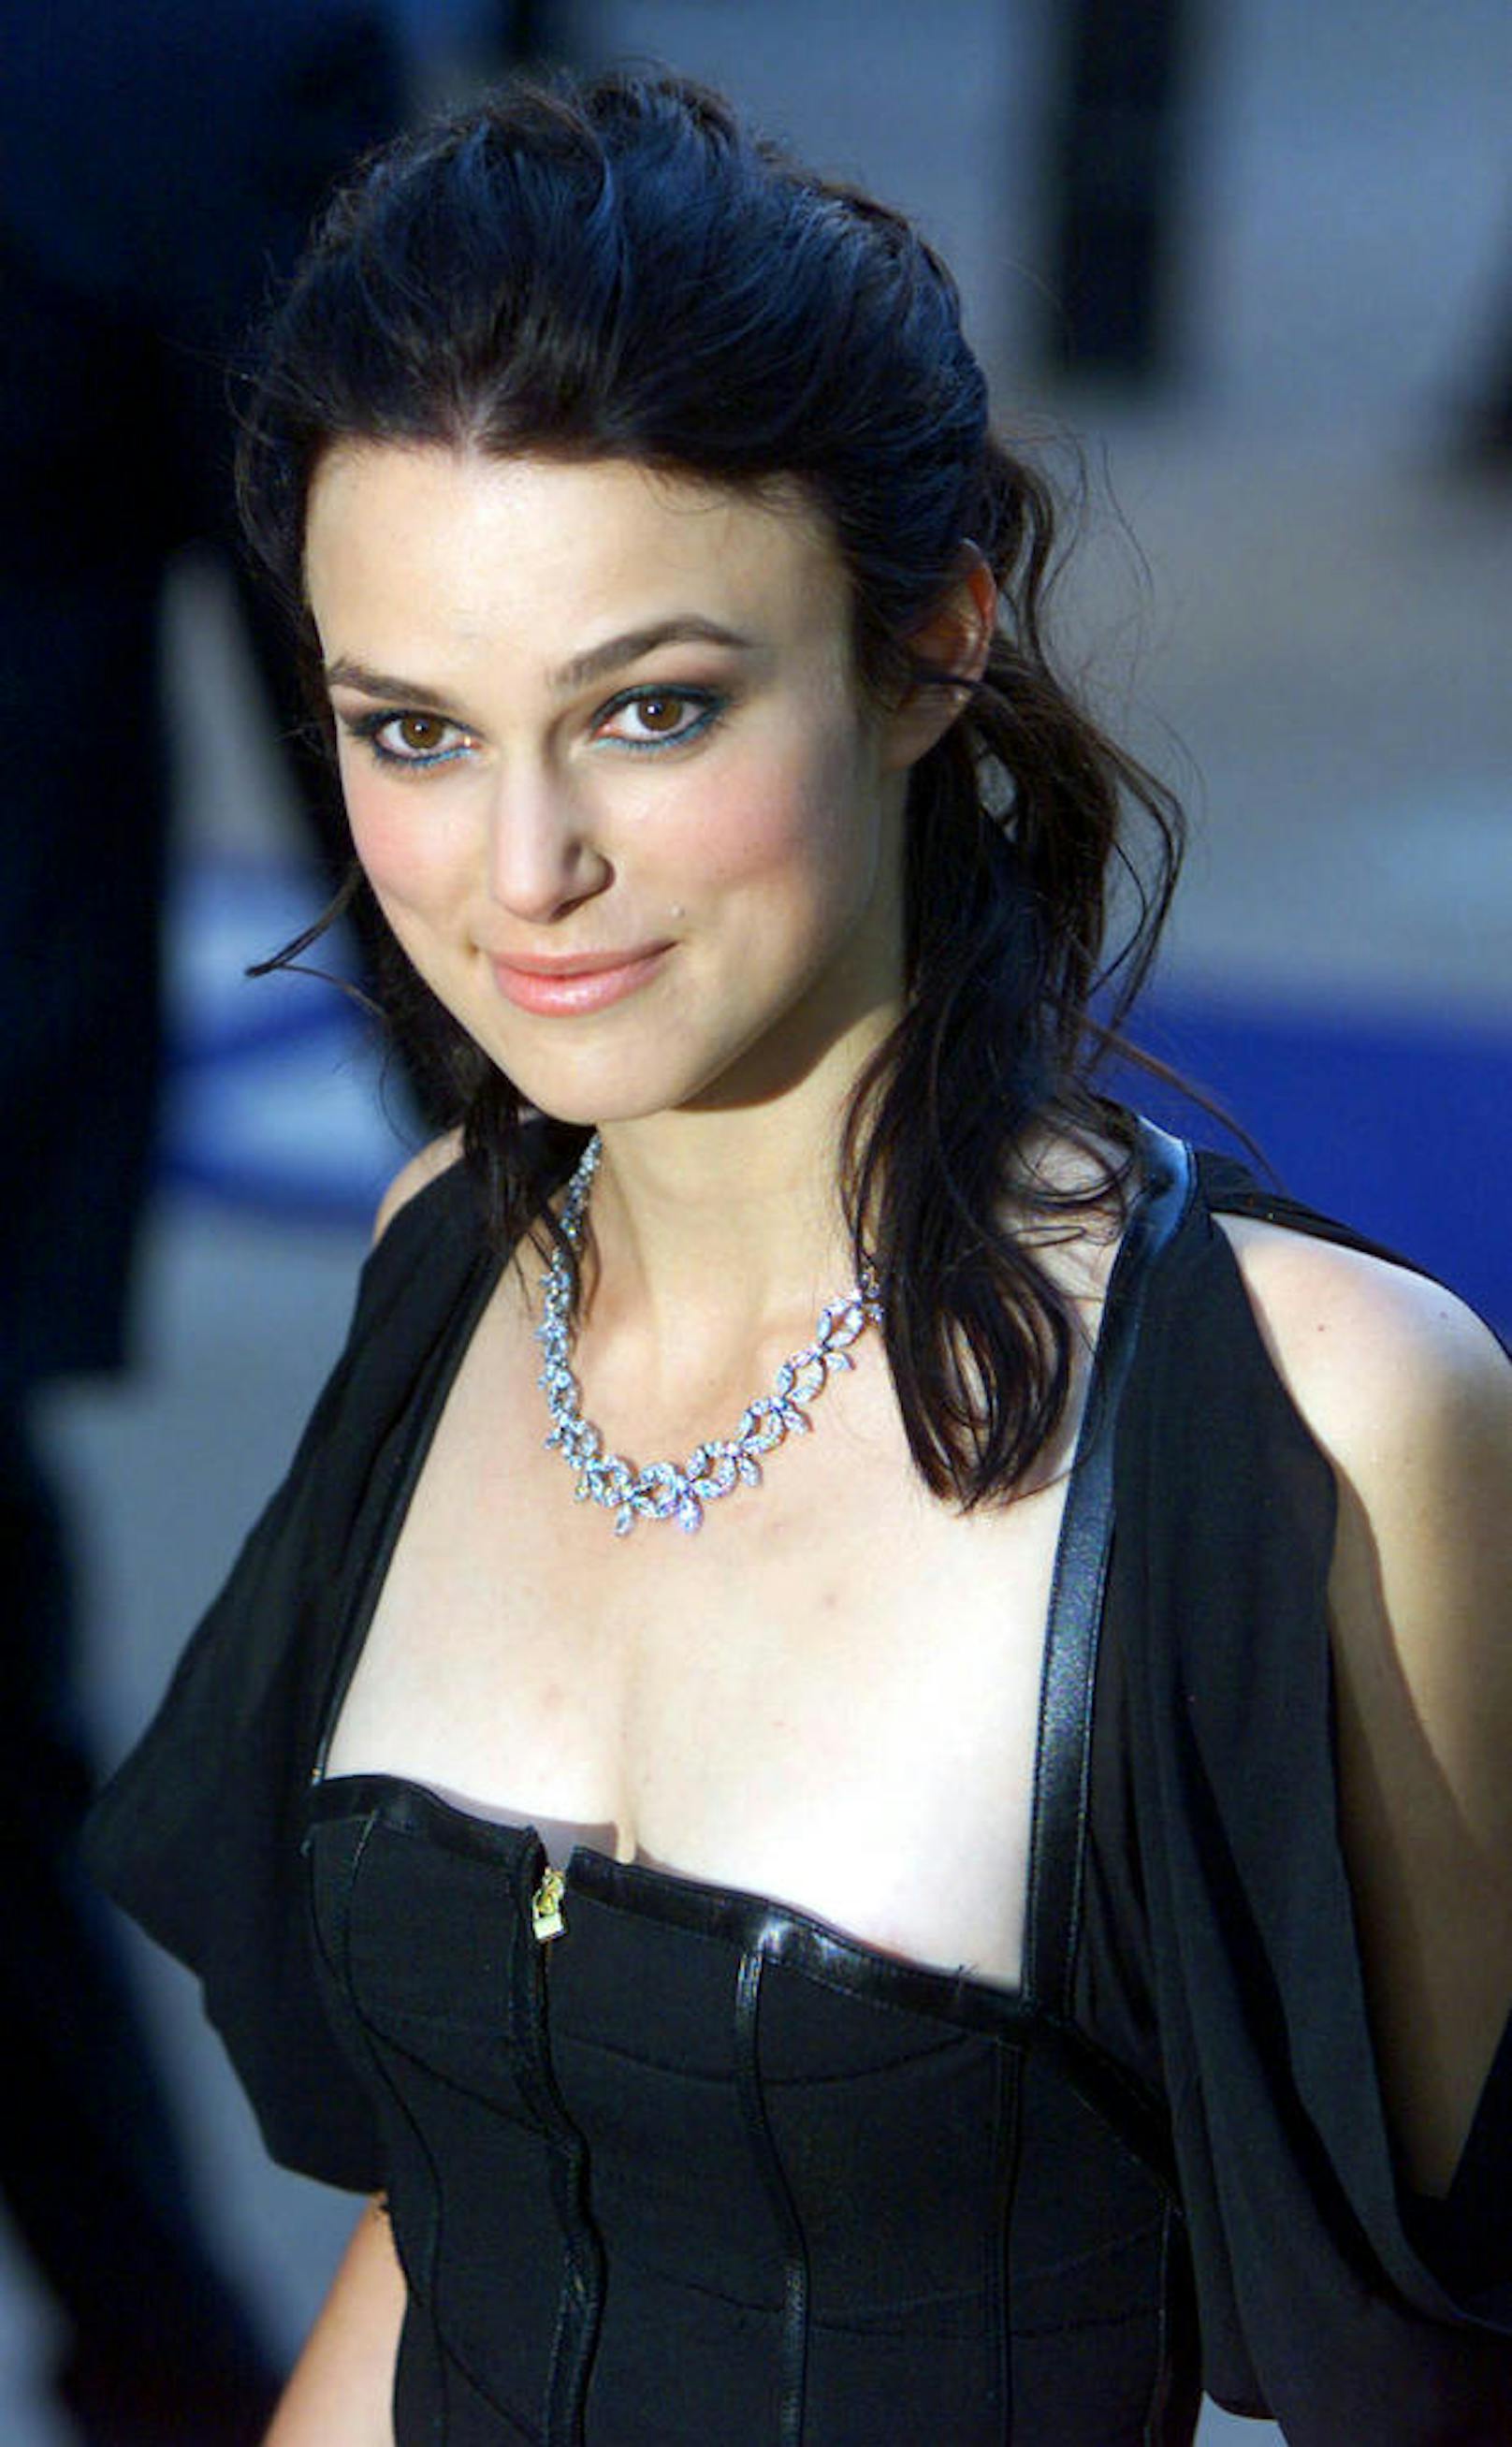 Keira Knightley bei der Premiere von 'The Pirates of the Caribbean: The Curse of the Black Pearl' in London, 2003.